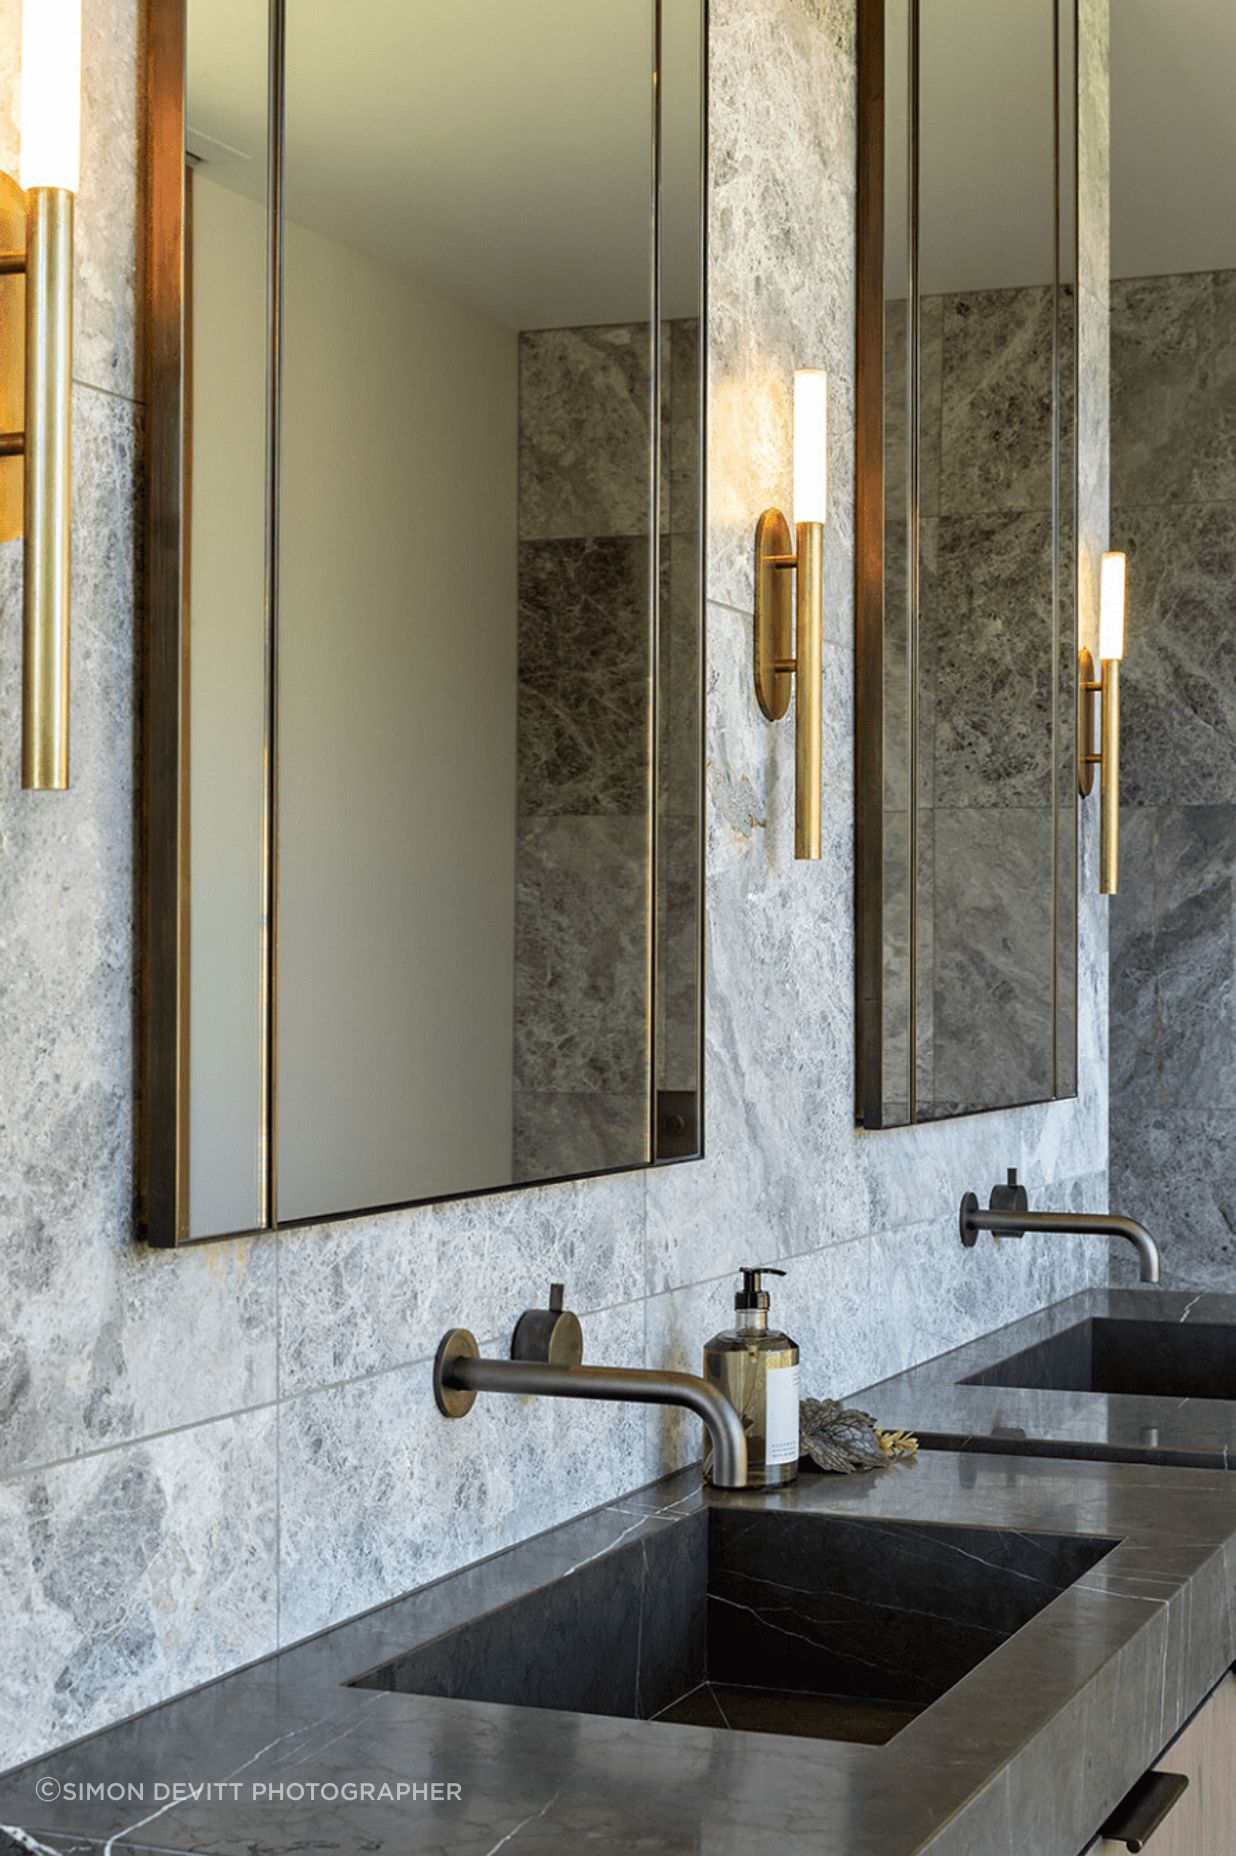 The master en suite has a luxurious feel, with custom vanity and steel accents.